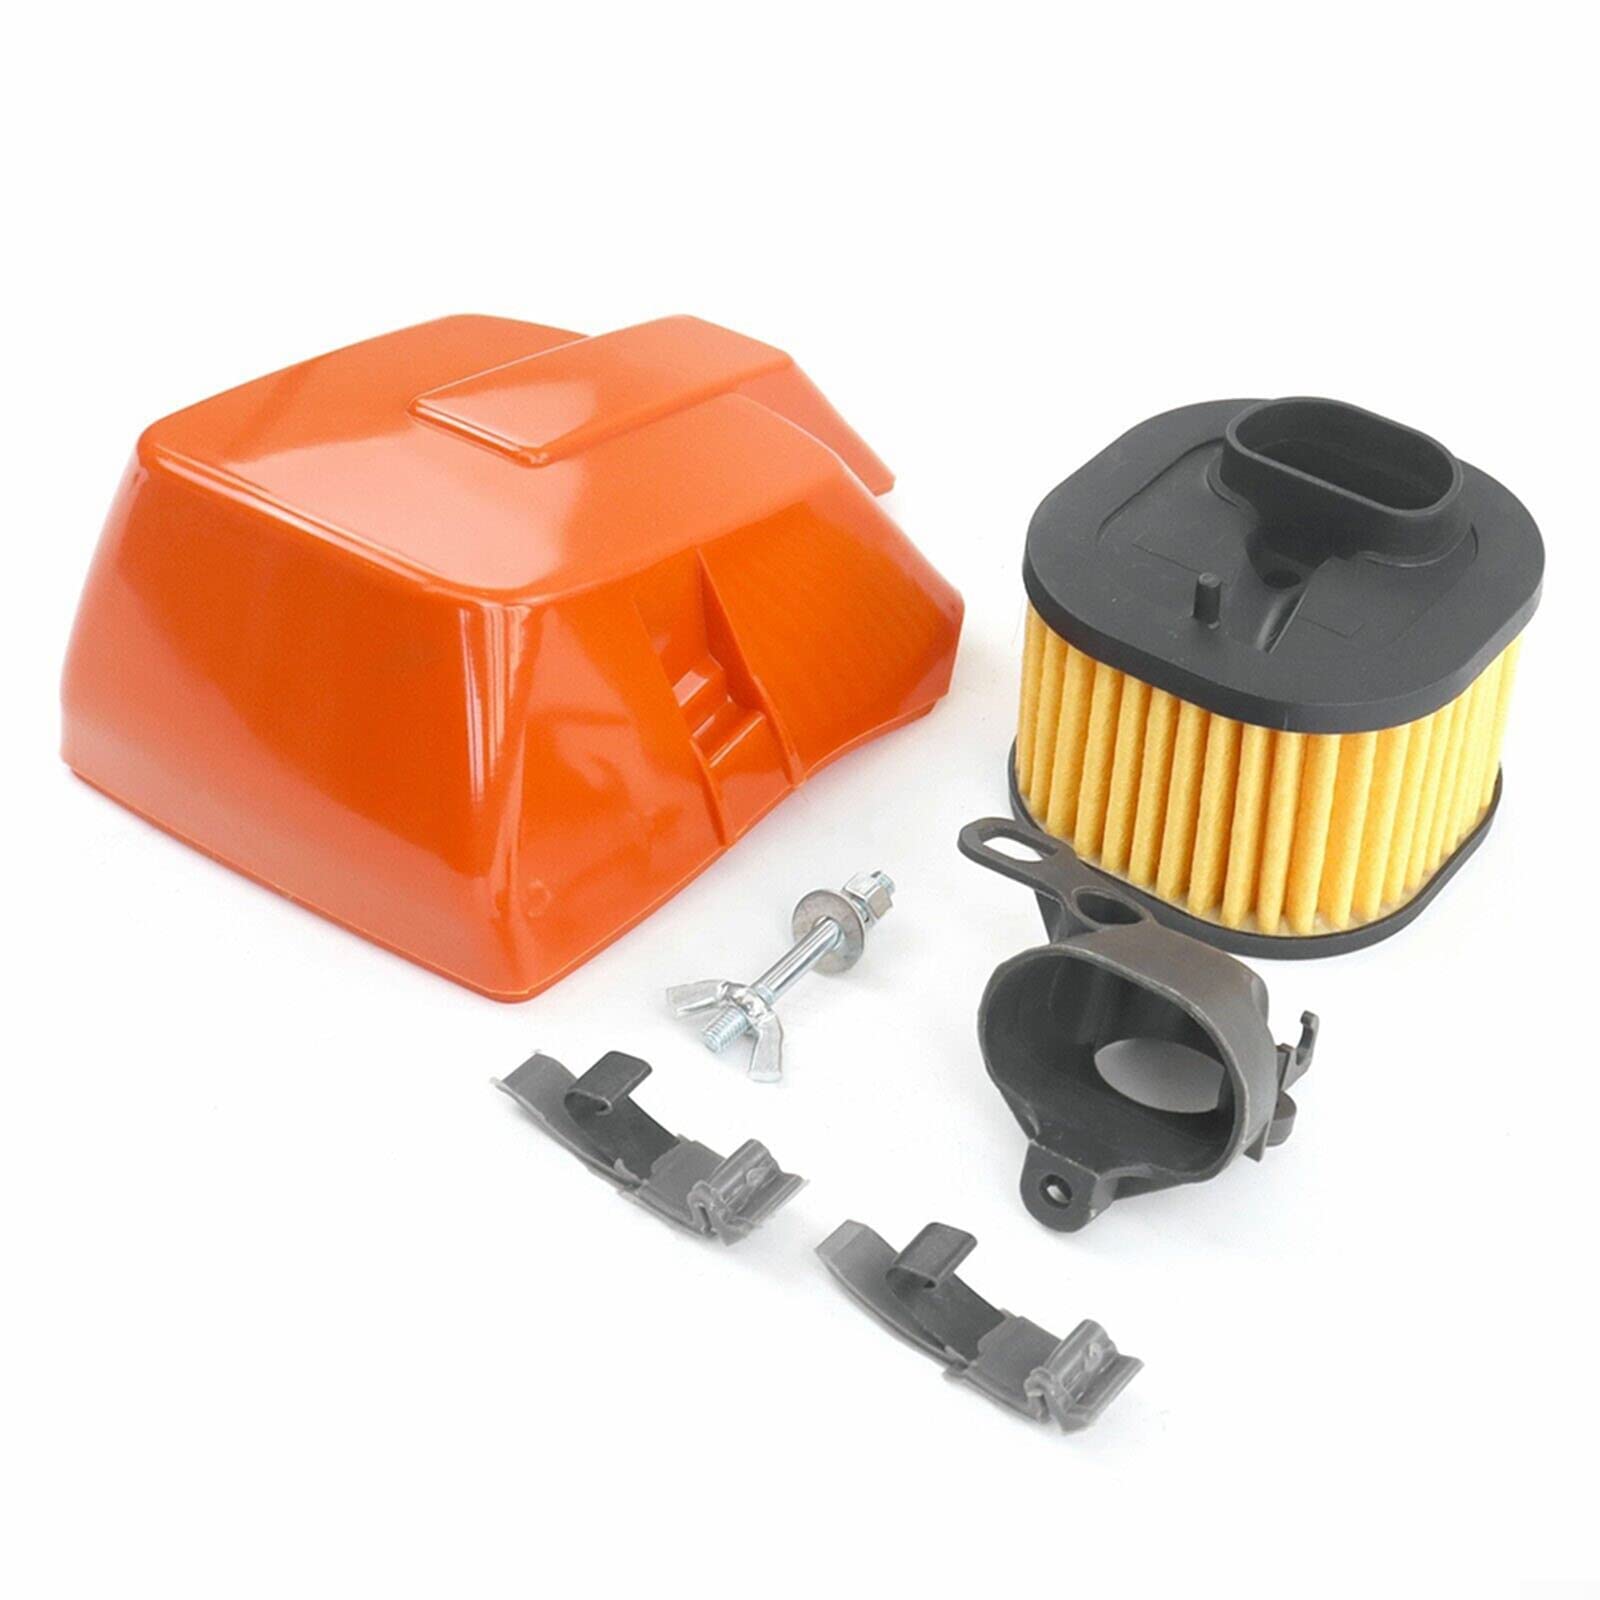 HD Top Air Filter Cover Holder Intake Adpator for Husqvarna 372 Chainsaw Parts von AIDNTBEO